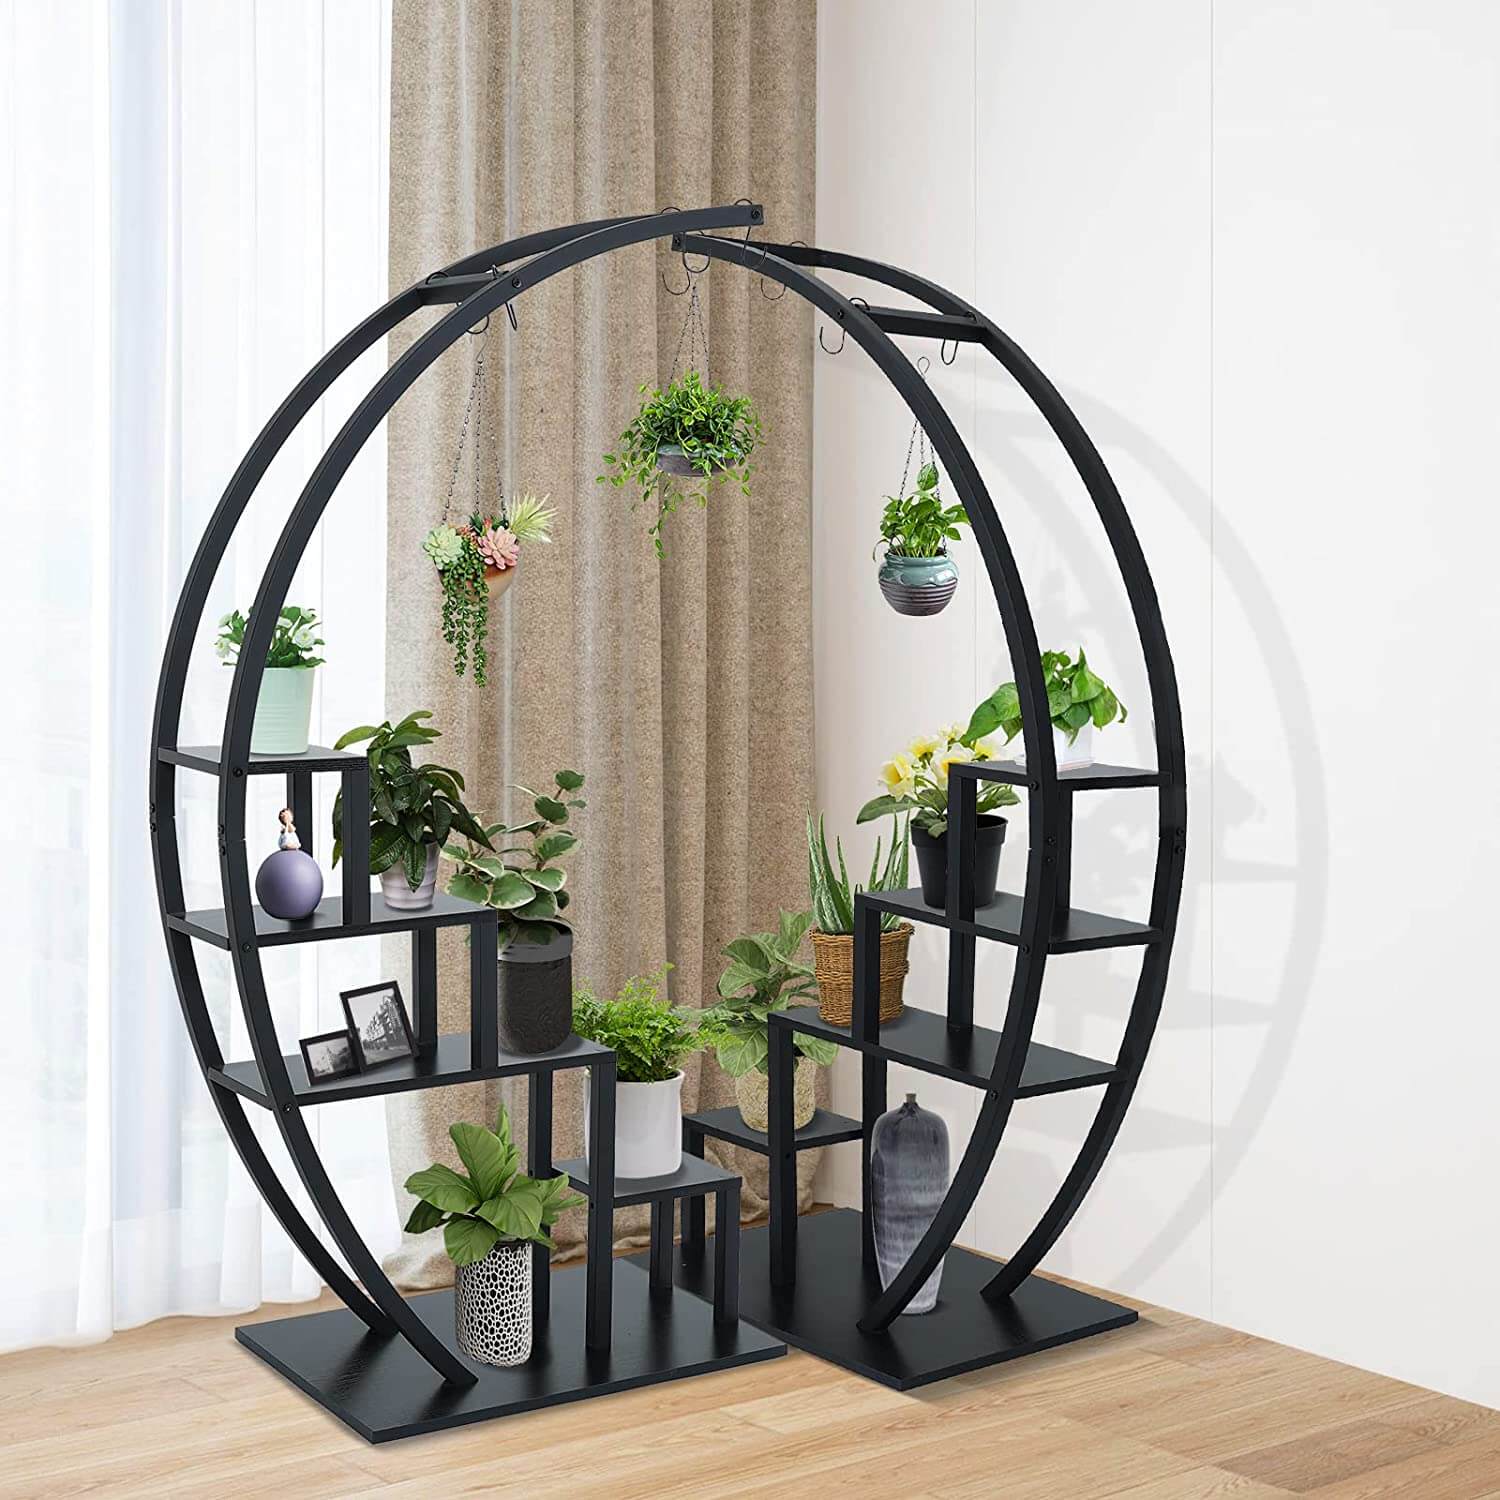 Black Plant Stand Indoor, 5 Tier Half Circle Ladder Flower Pot Stand GD003 can put in the corner